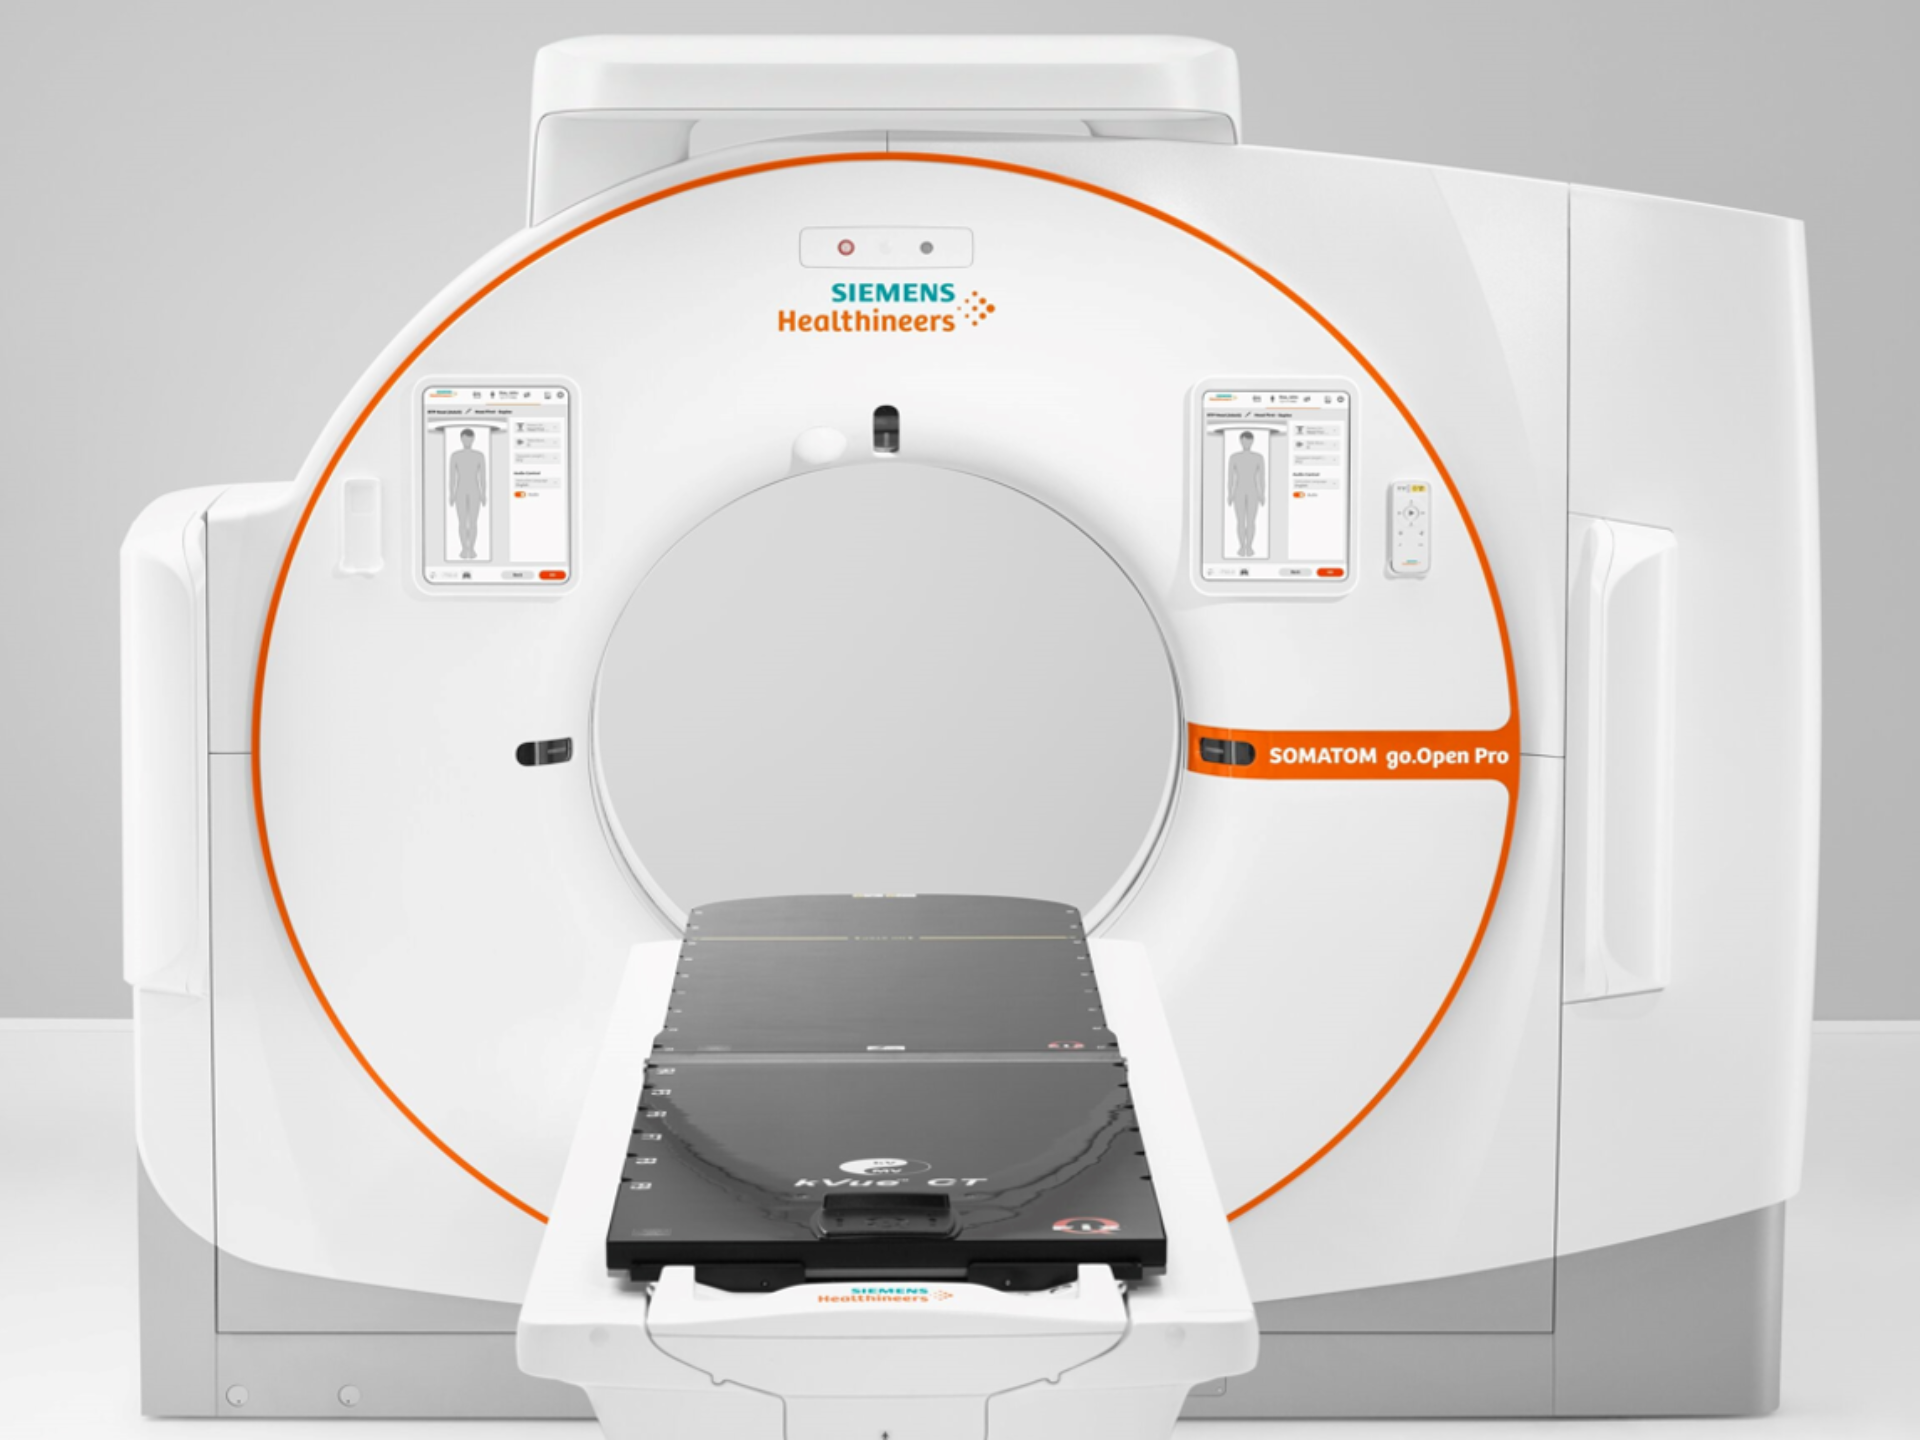 siemens-healthineers_CT_CT-Scanners-for-Radiation-Therapy_SOMATOM-go.Open-Pro